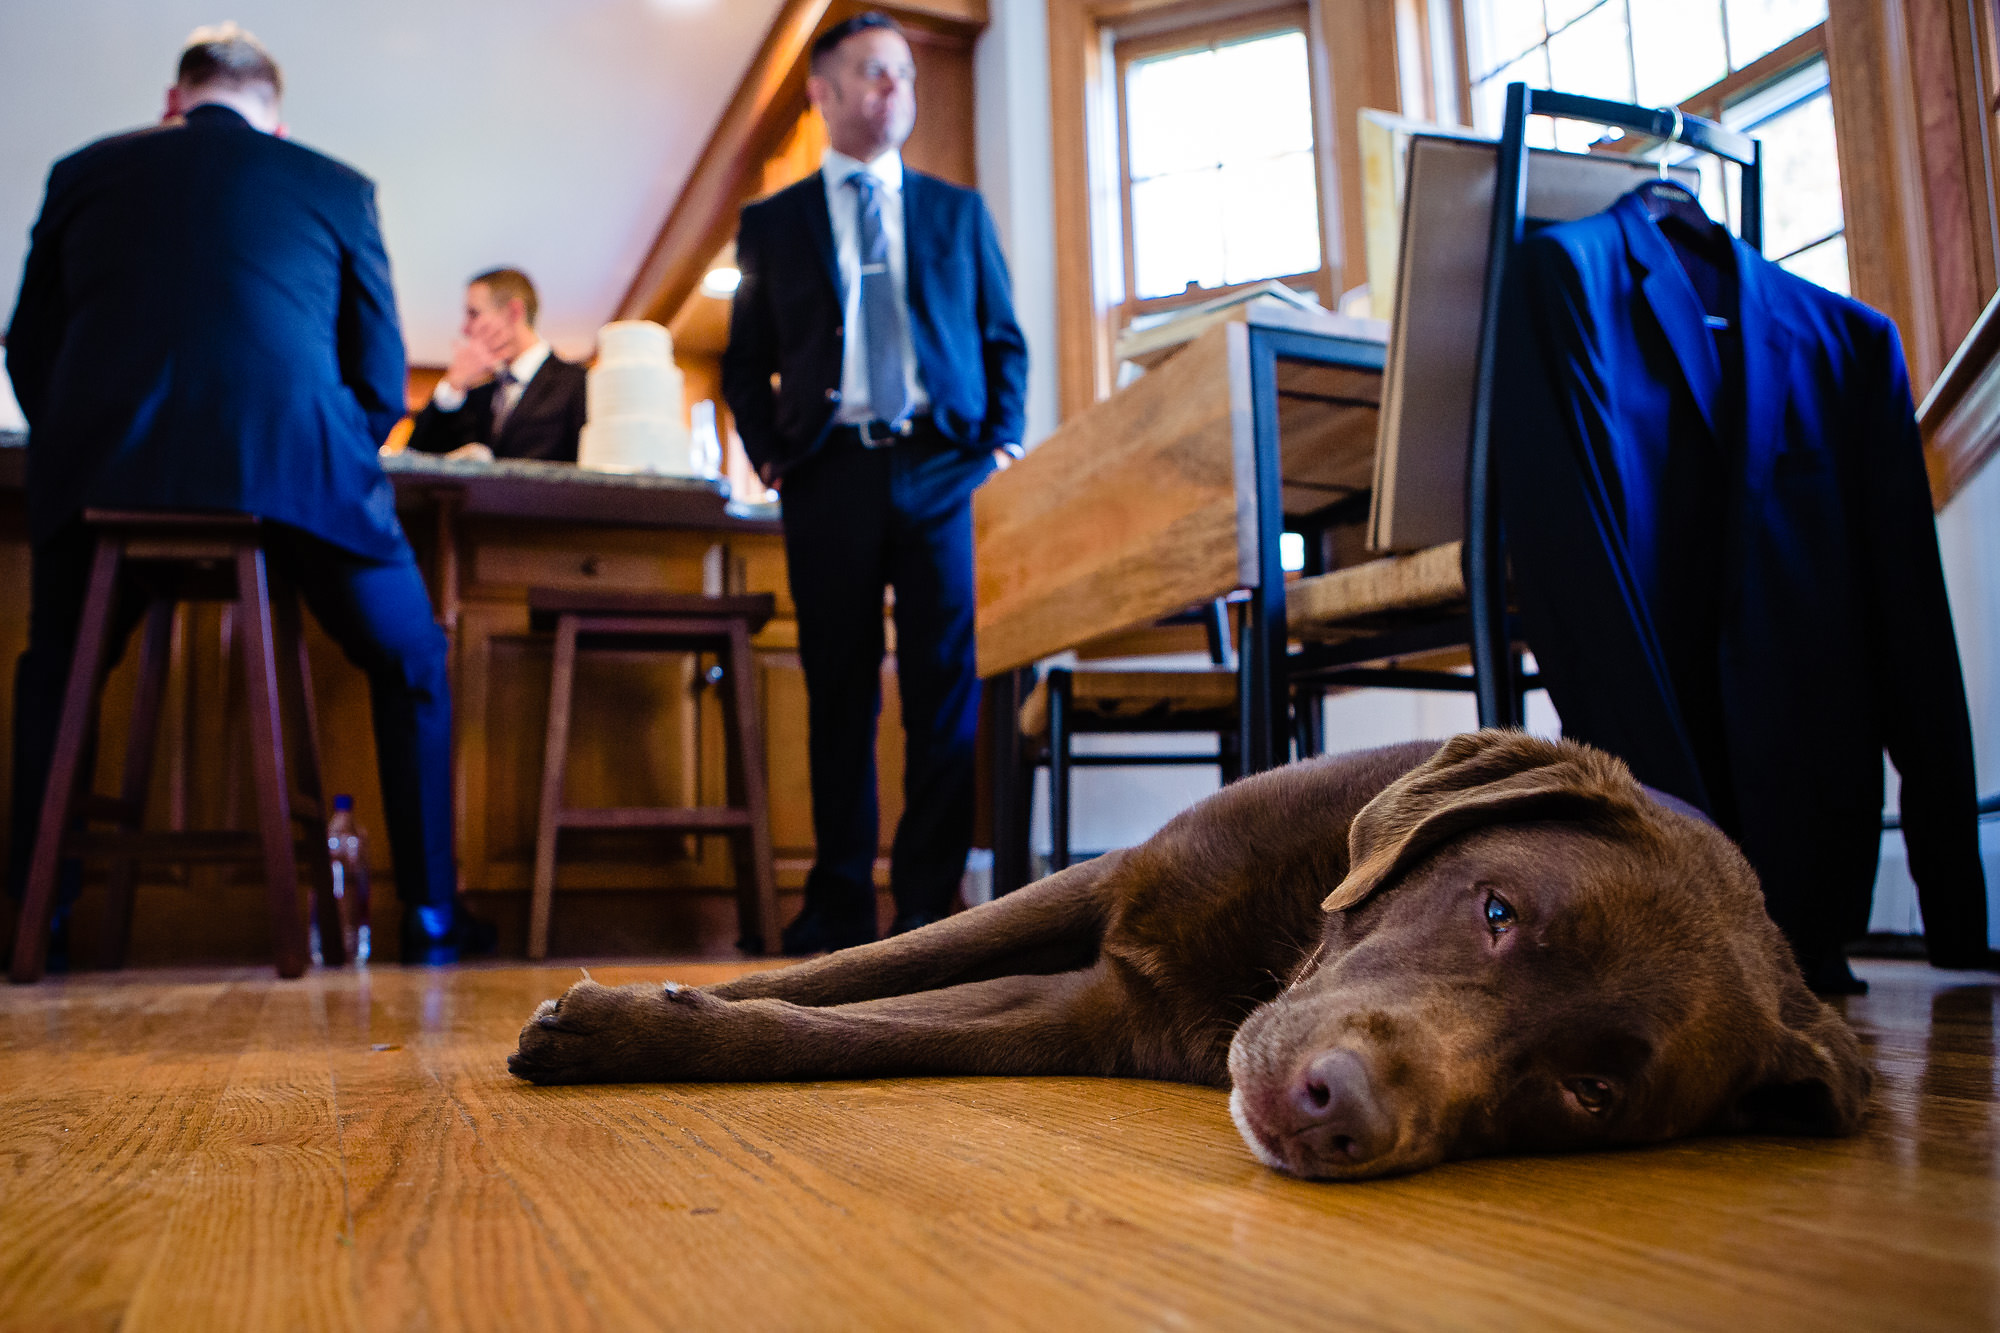 The groom gets ready with his groomsmen and his dog.